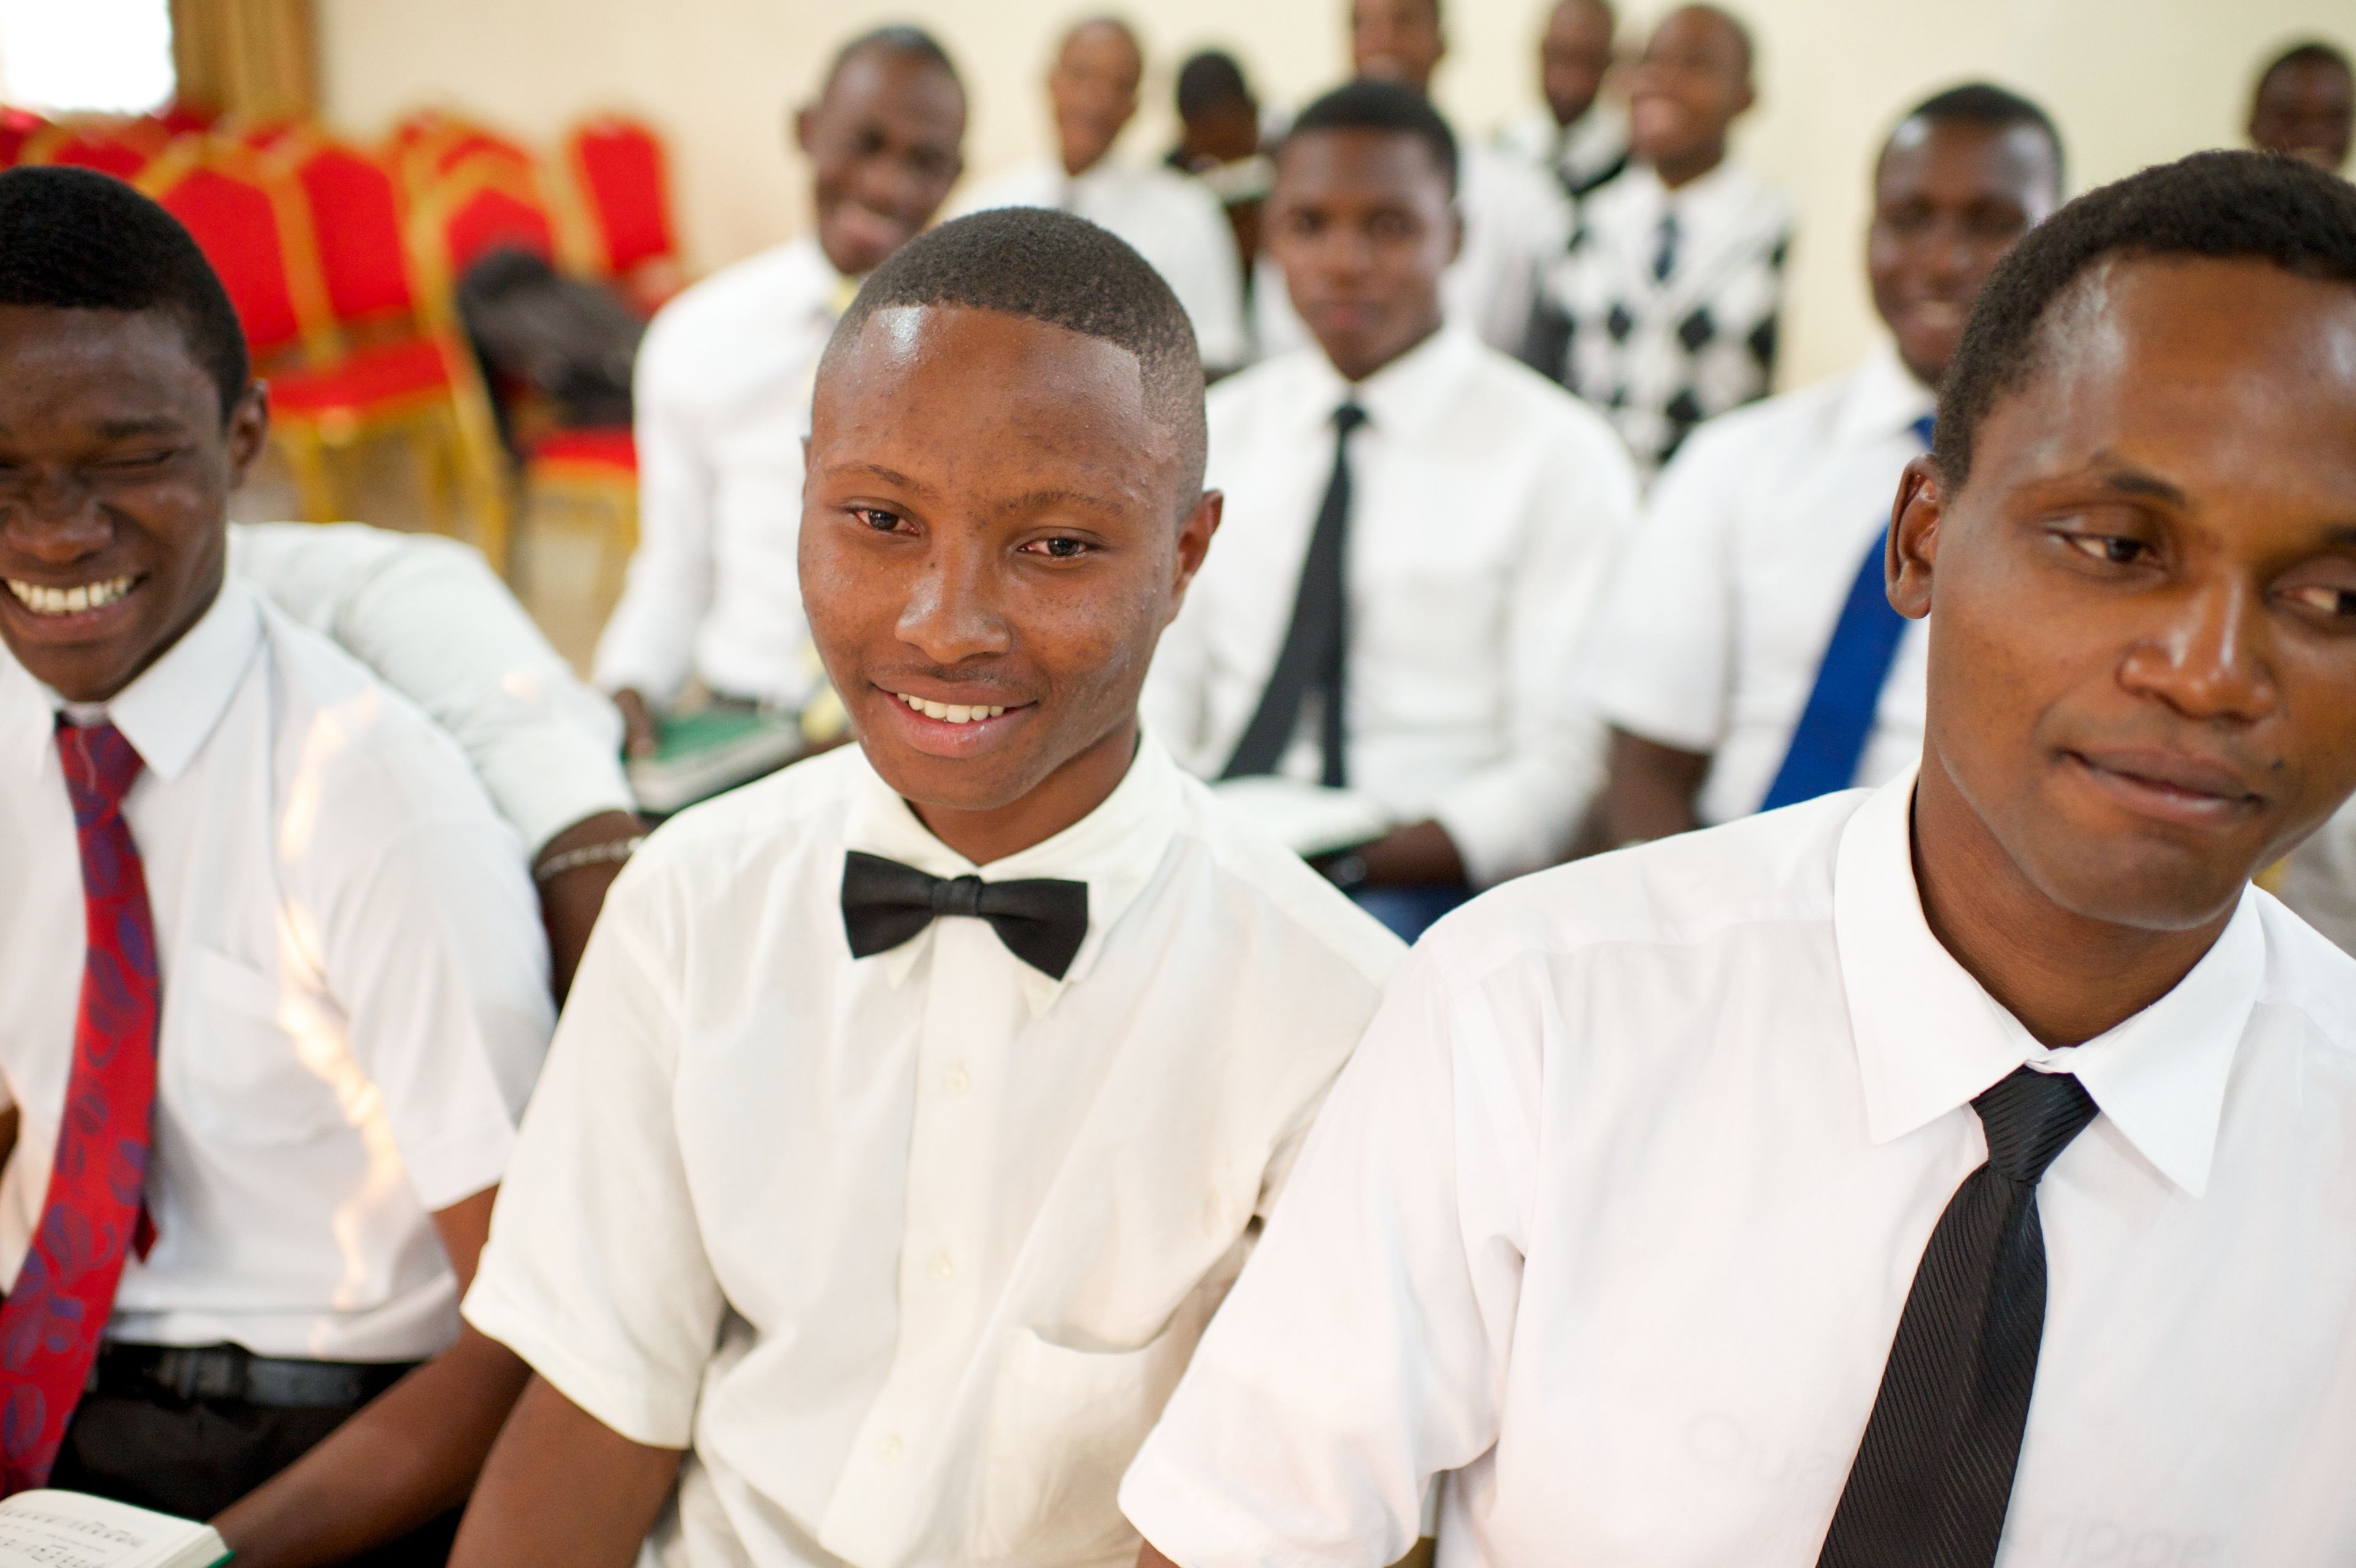 Young men from Africa sit in rows at church.